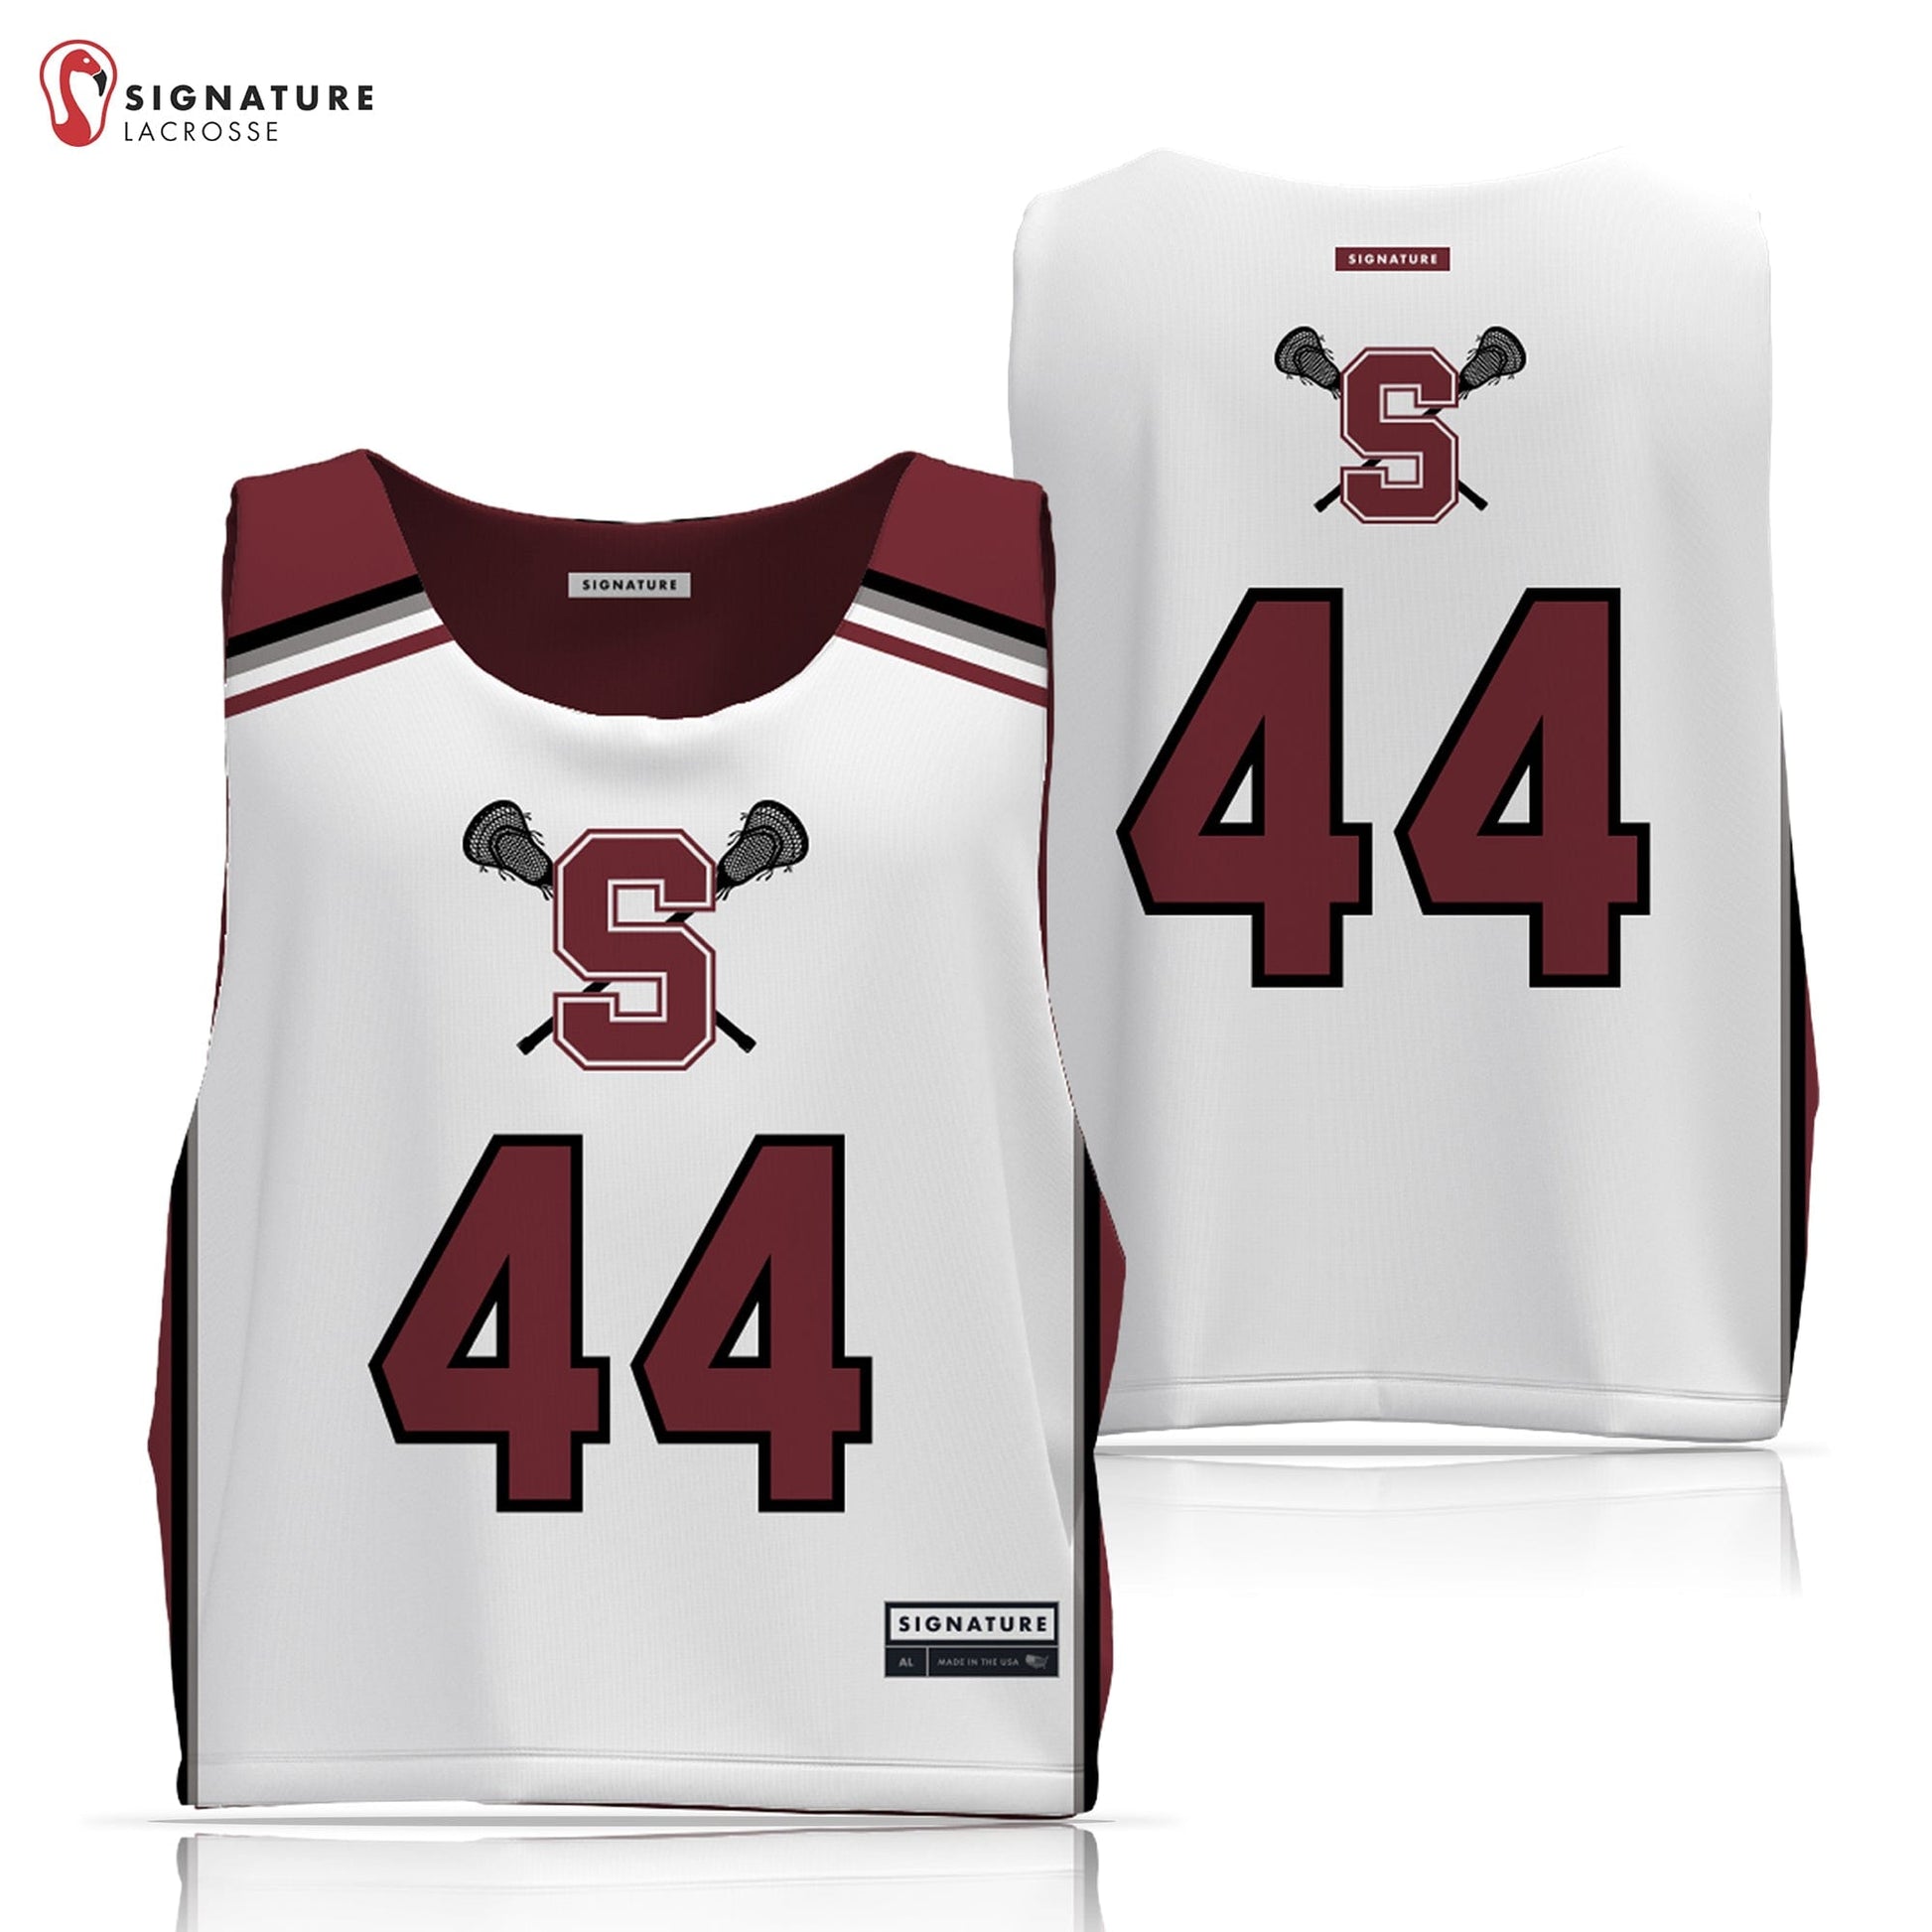 State College Men's 2 Piece Player Game Package Signature Lacrosse